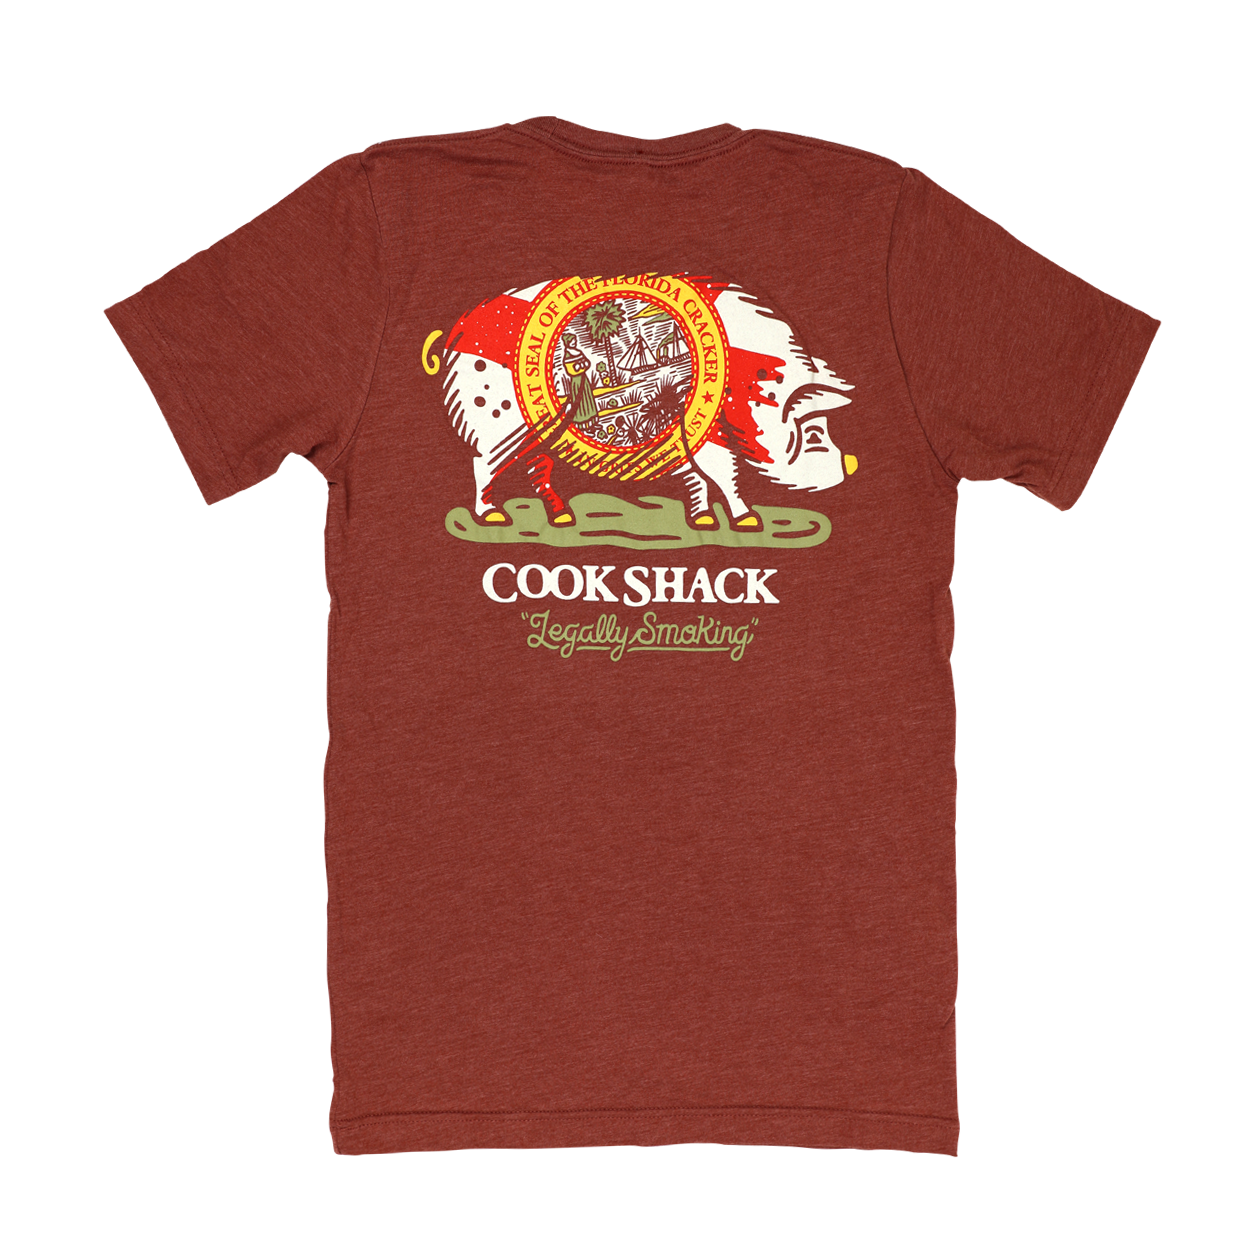 COOK SHACK STATE PIG SHIRT S/S - HEATHER CLAY